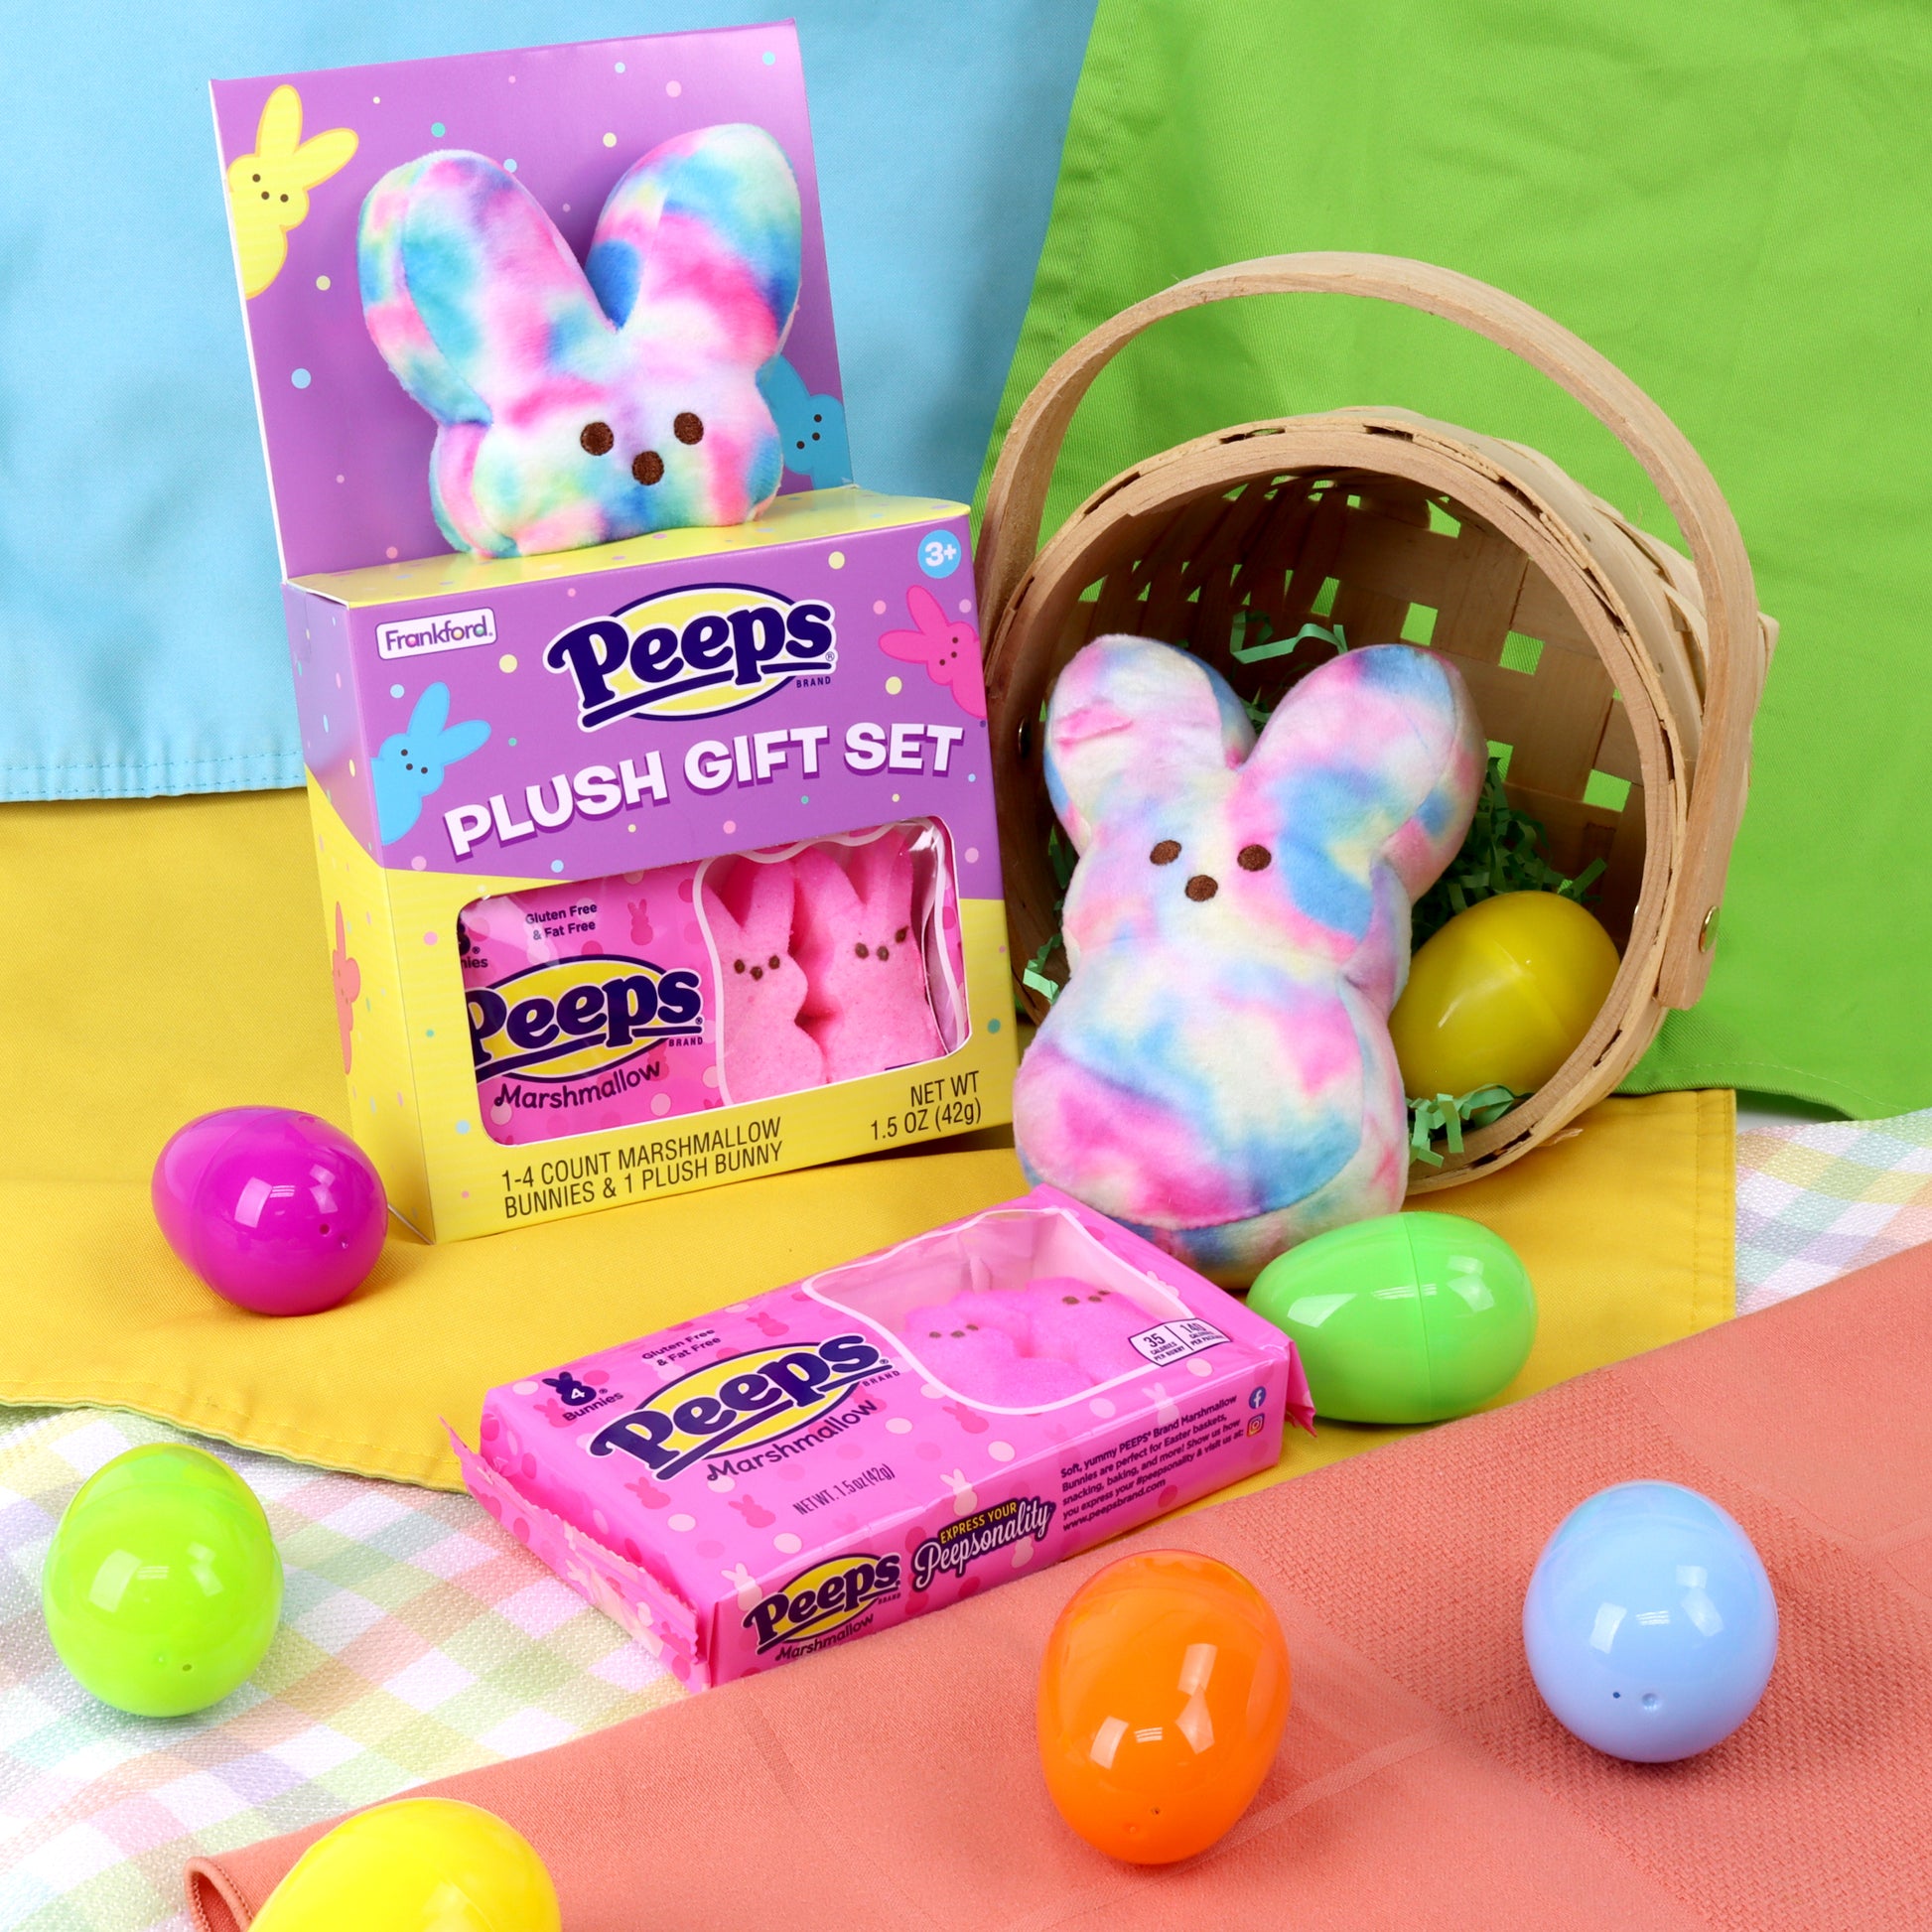 purple and yellow box with a tie dye plush bunny and pink peeps marshmallows and tie dye bunny and pink peeps in a basket with plastic eggs around